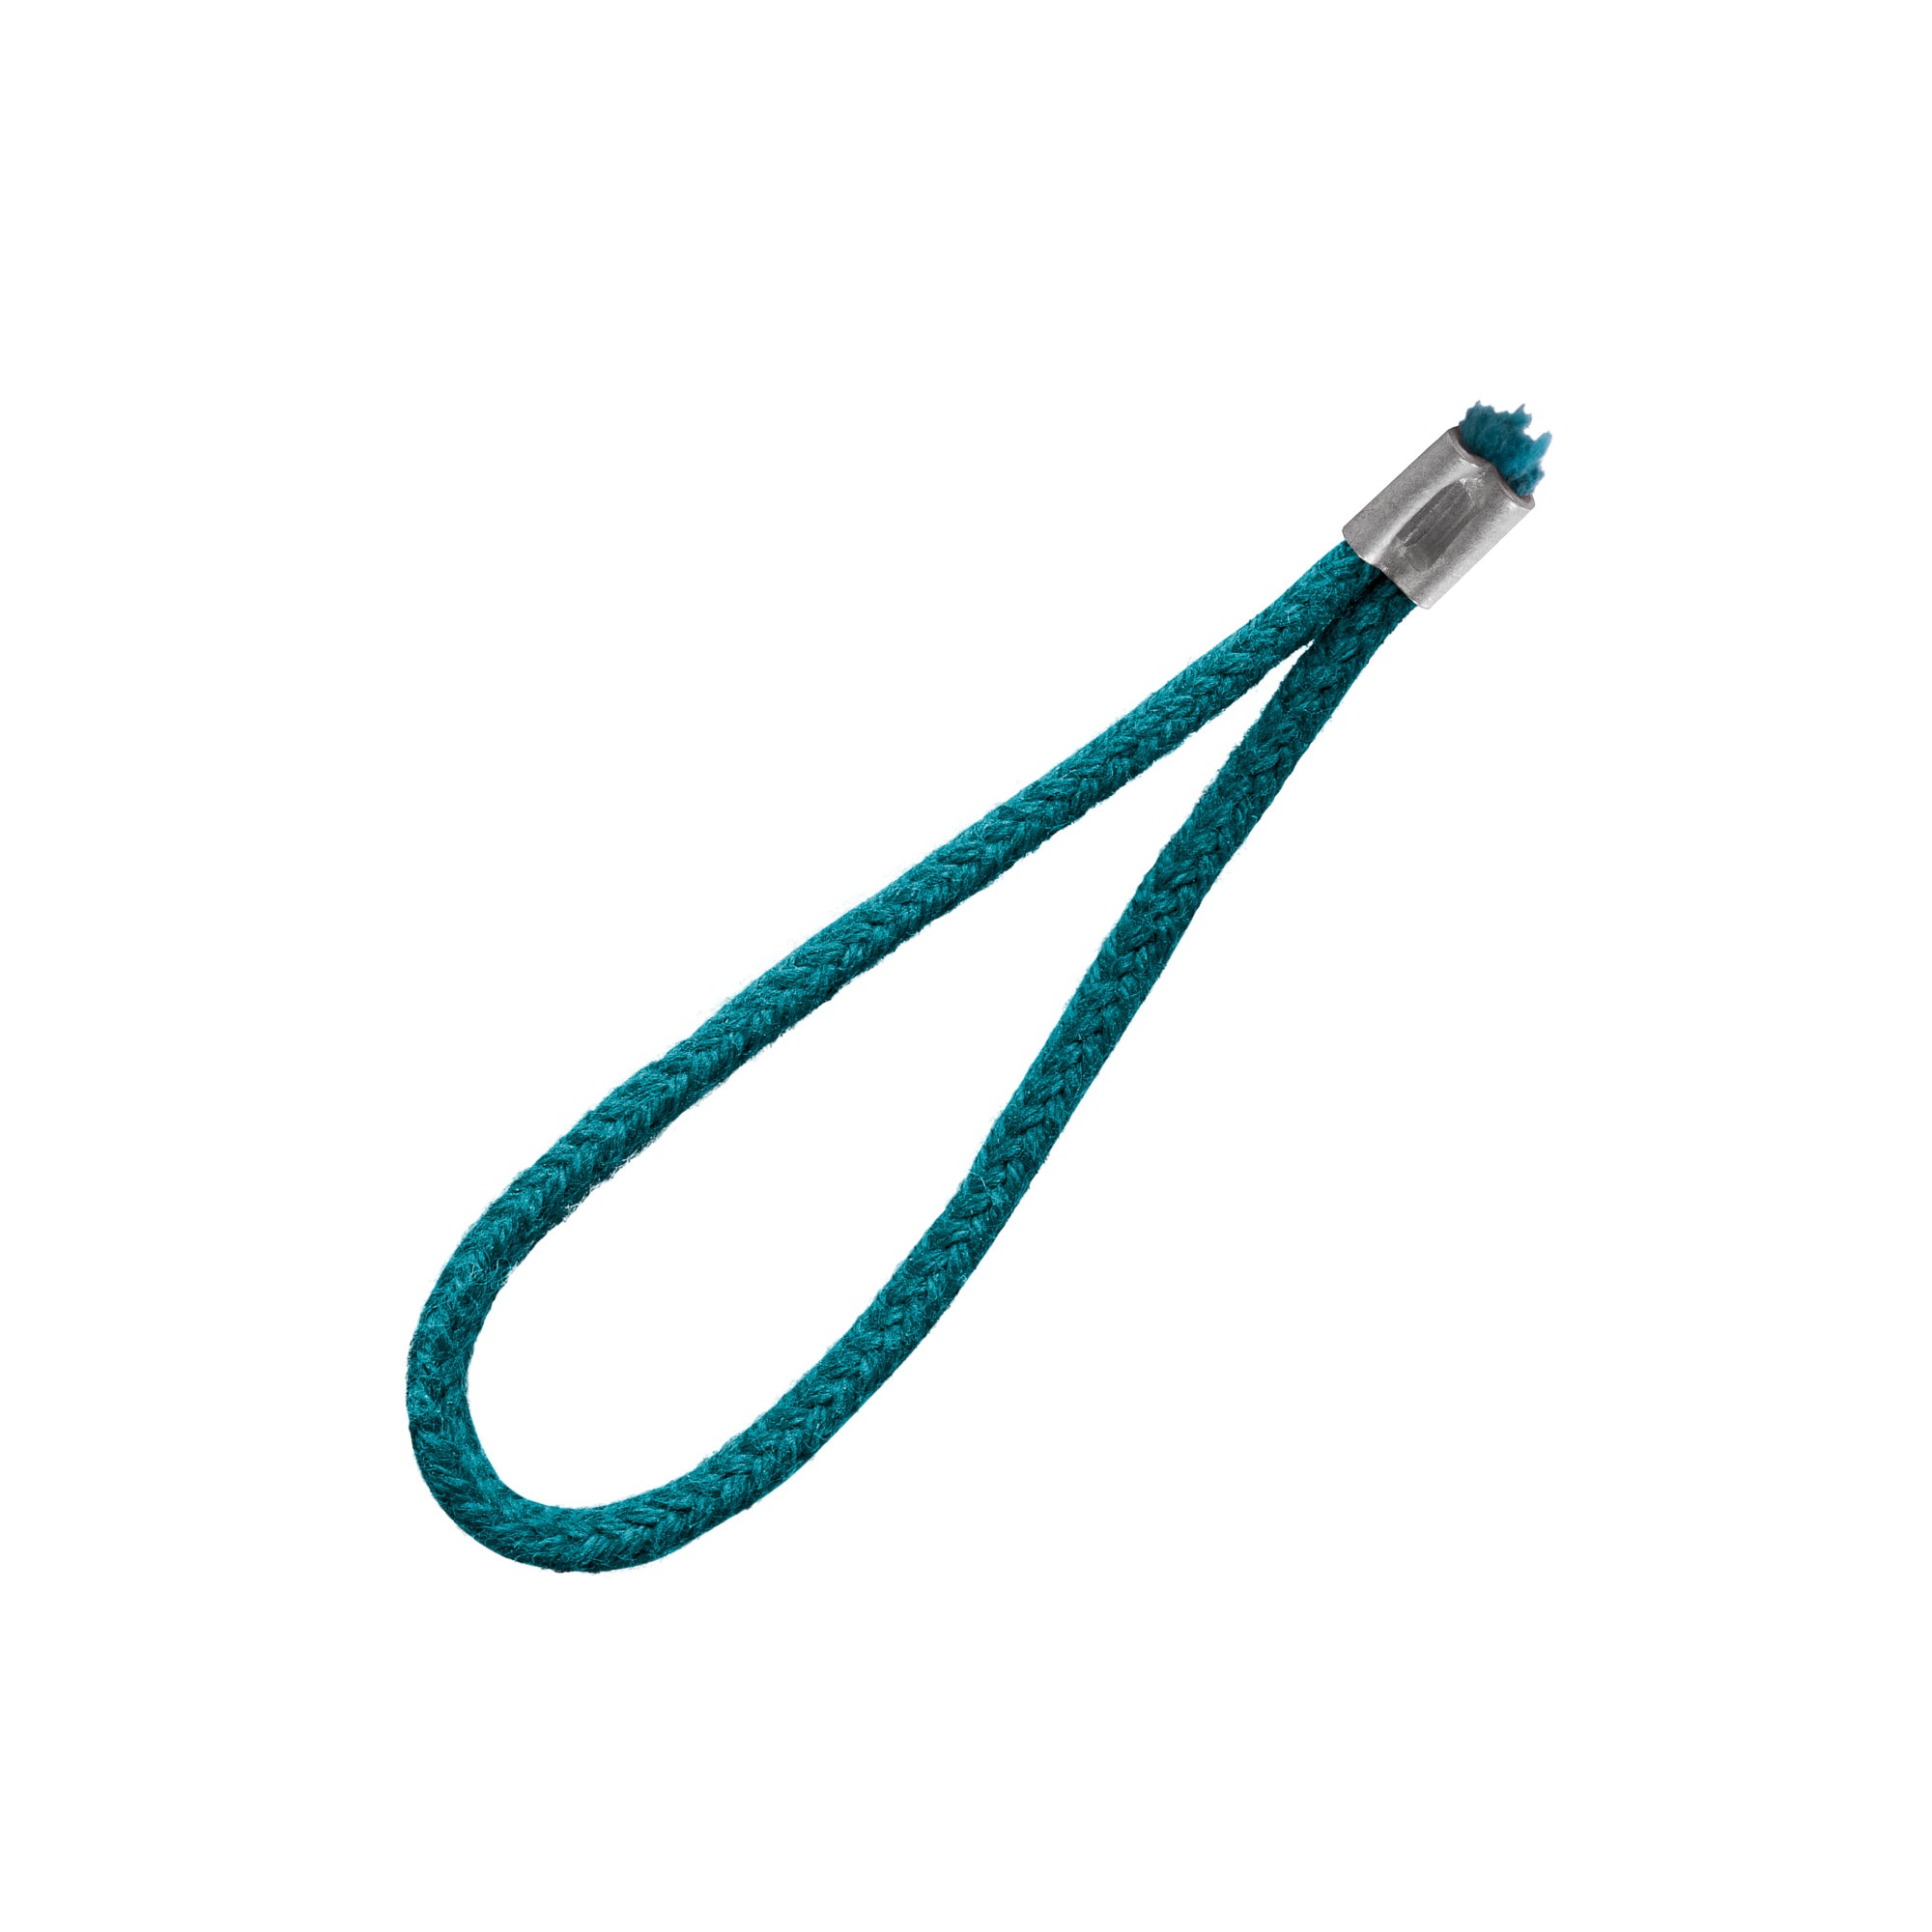 MÜHLE Companion Exchangeable Cord, Turquoise